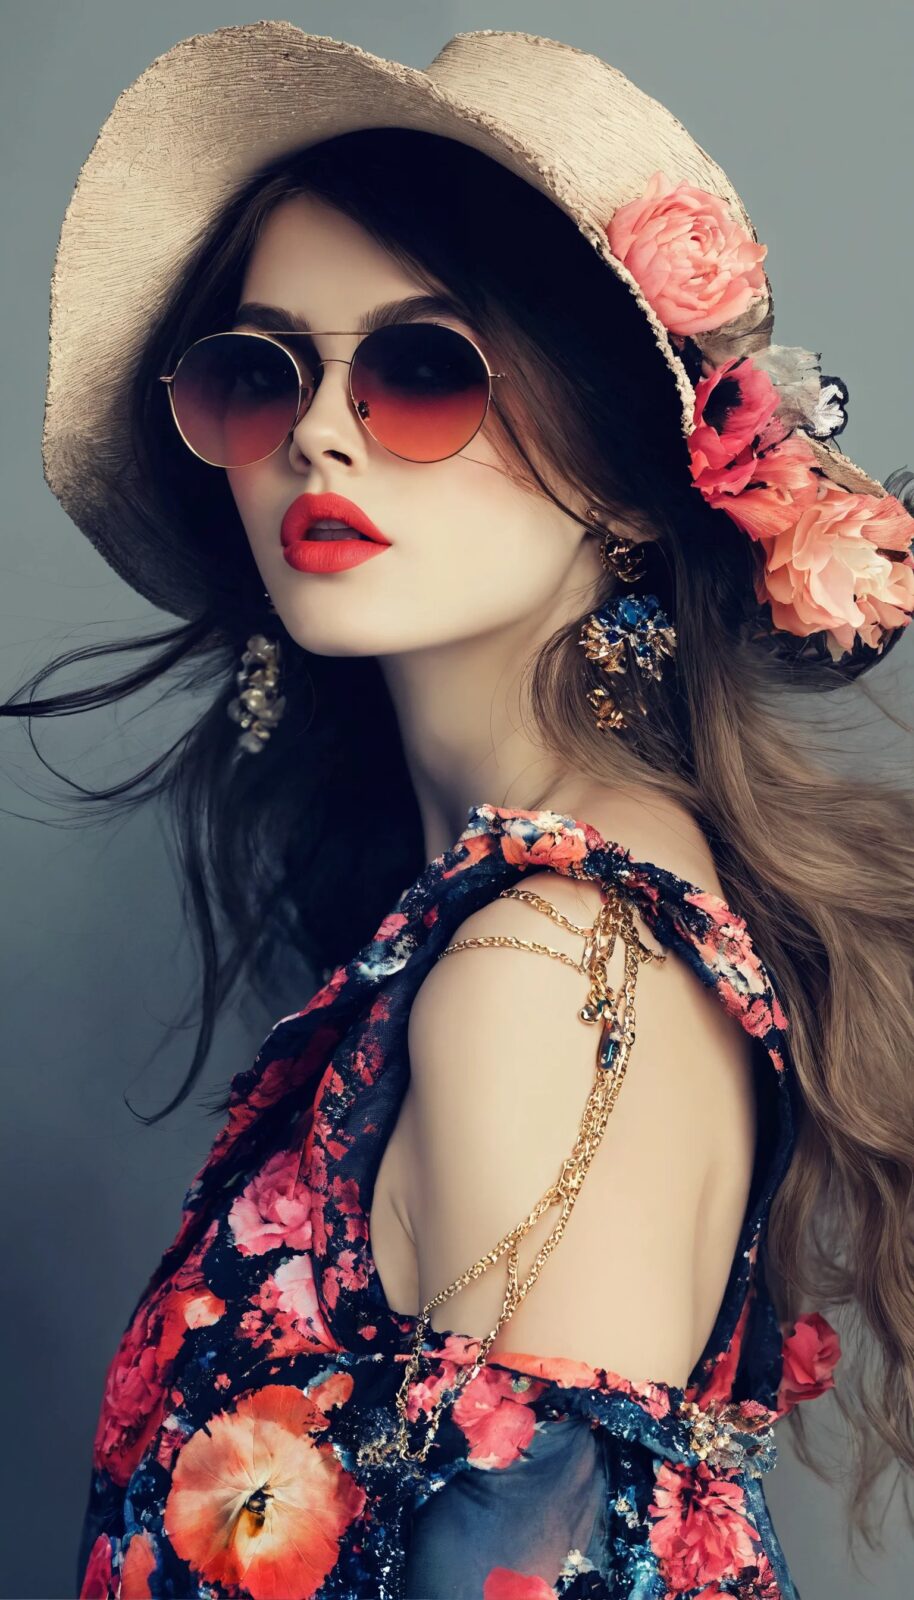 Fashion Girl iPhone Wallpapers